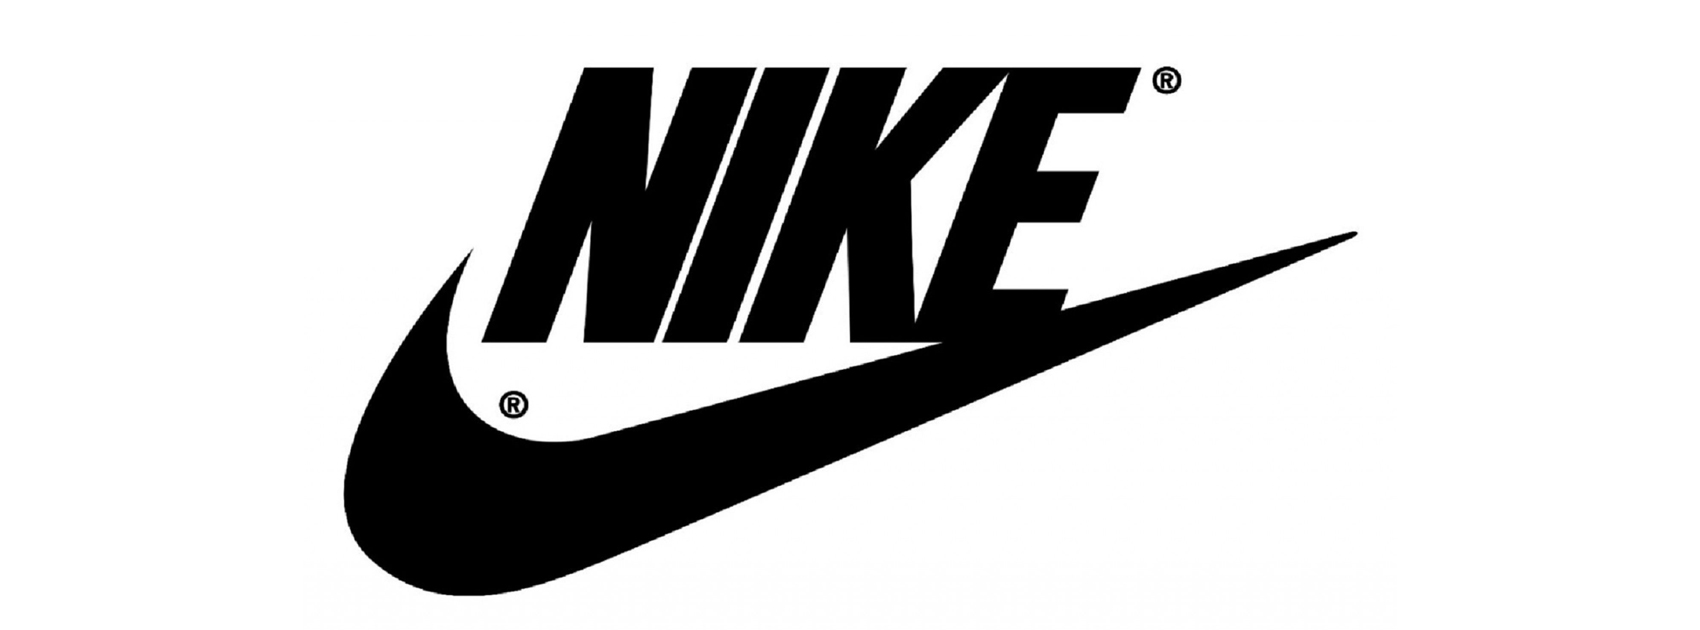 Nike Unknown Facts,Inspiring Facts about Nike, Interesting Facts 2019, Most Interesting Facts, Real history of Nike, startup stories, Surprising Facts About Nike, Nike Amazing Facts, Nike Facts, Nike Facts 2019, Nike Interesting Facts, Nike Latest News, Nike Success Story,nike founder